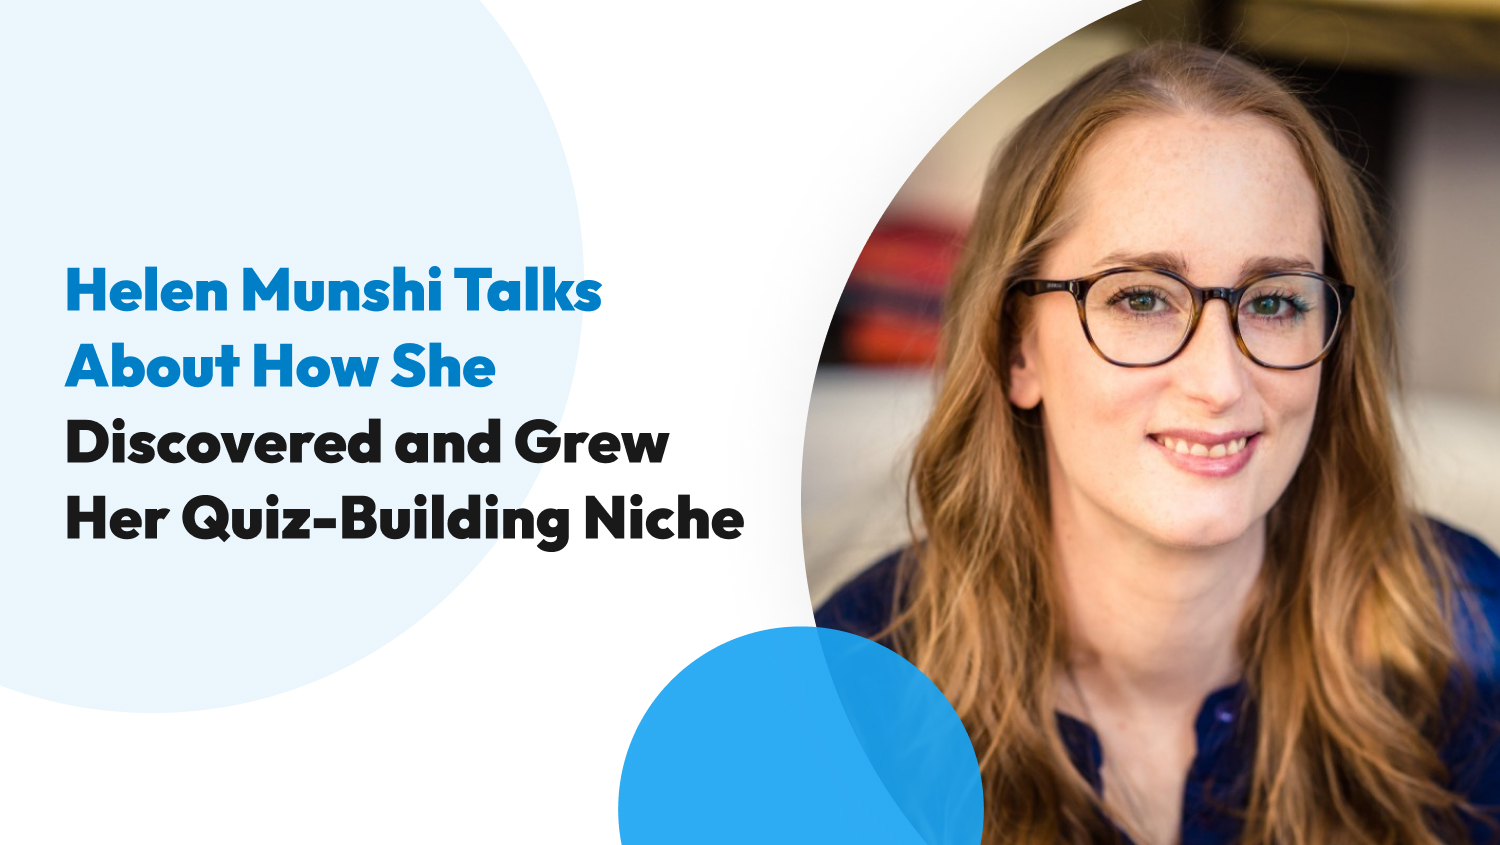 Helen Munshi Talks About How She Discovered and Grew Her Quiz-Building Niche